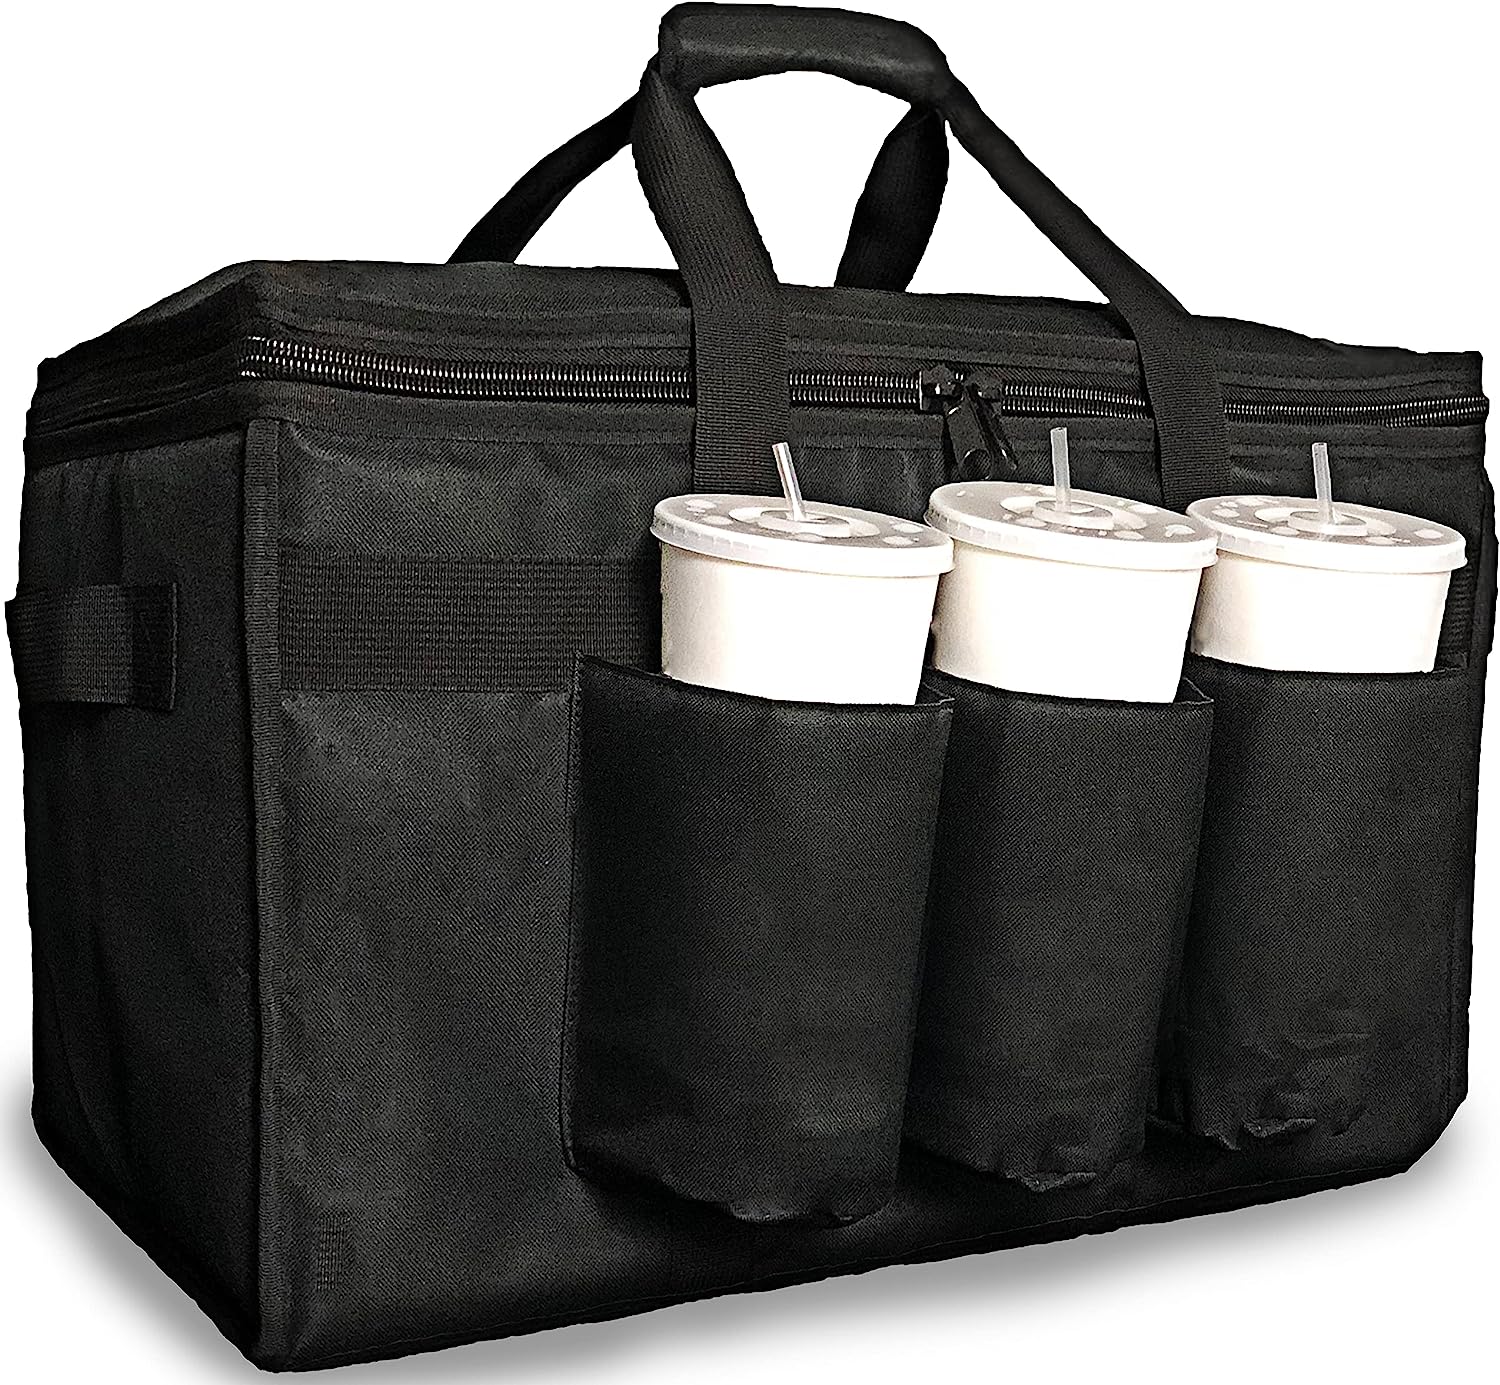 Insulated-Food-Delivery-Bag